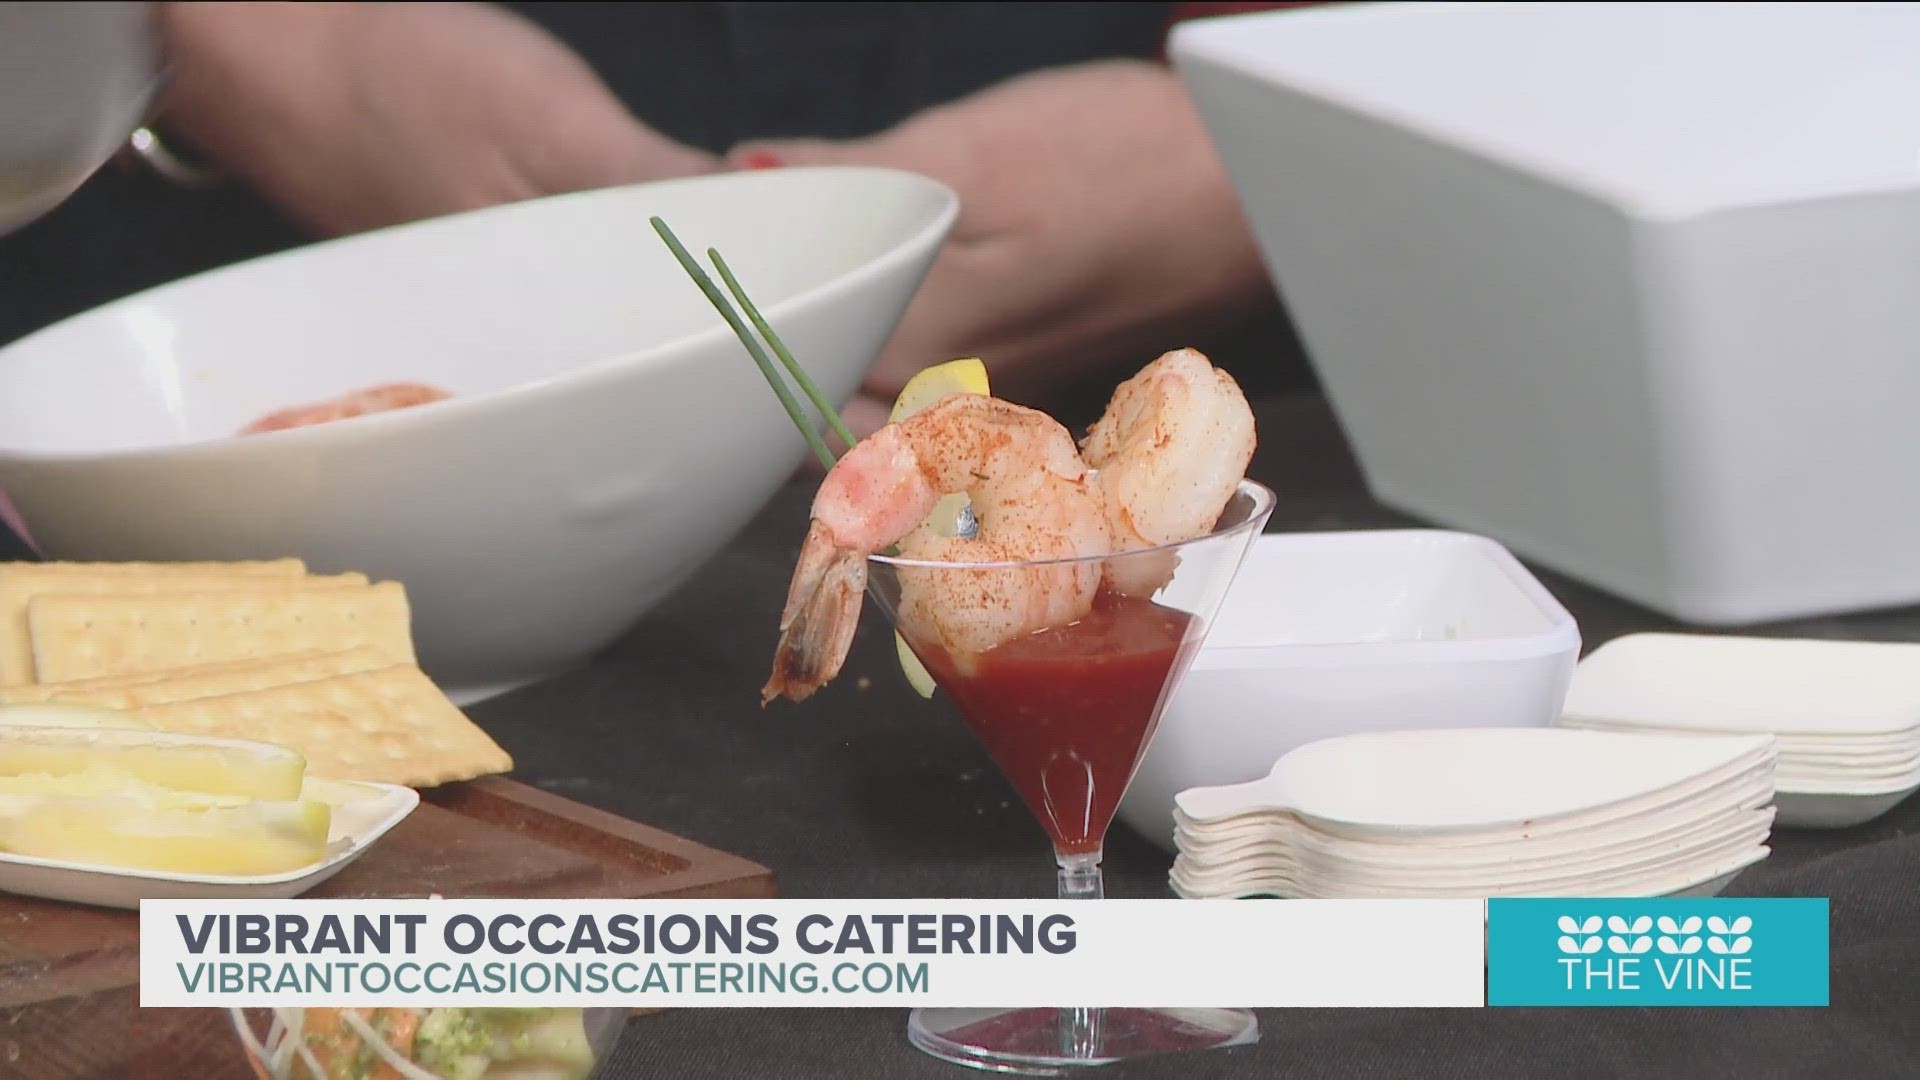 Using store-bought items Chef Serge Krikorian serves up 3 different appetizers that are easy to make and taste great.